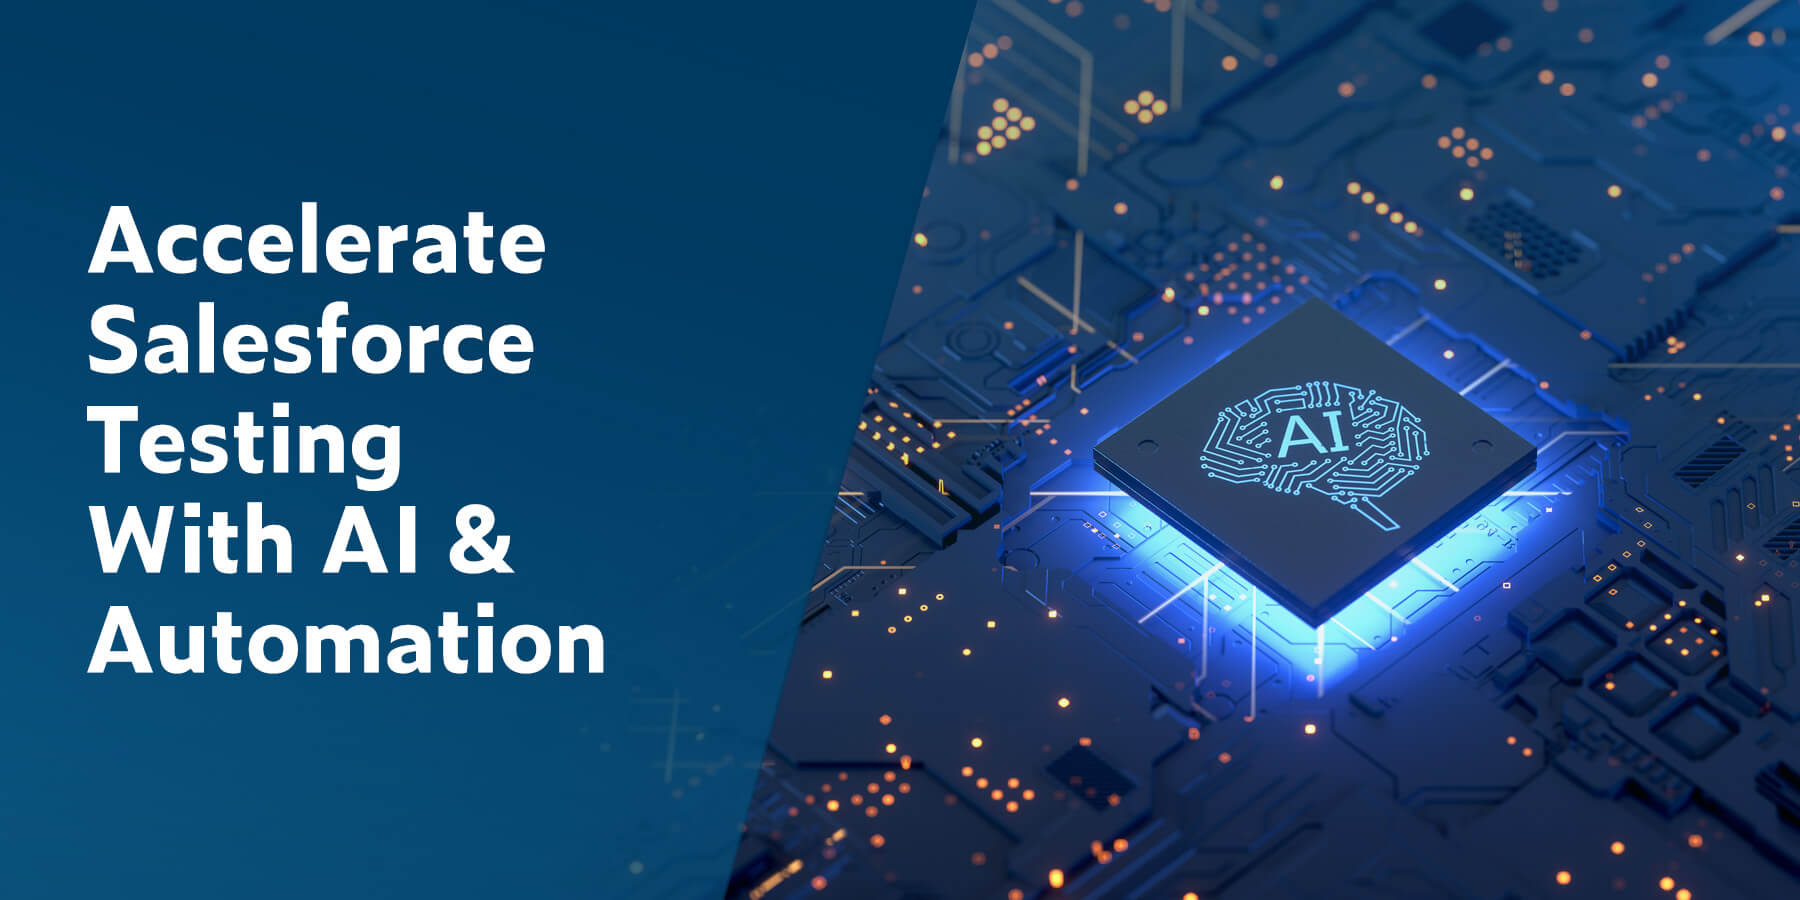 Accelerate Salesforce Testing With AI & Automation Parasoft